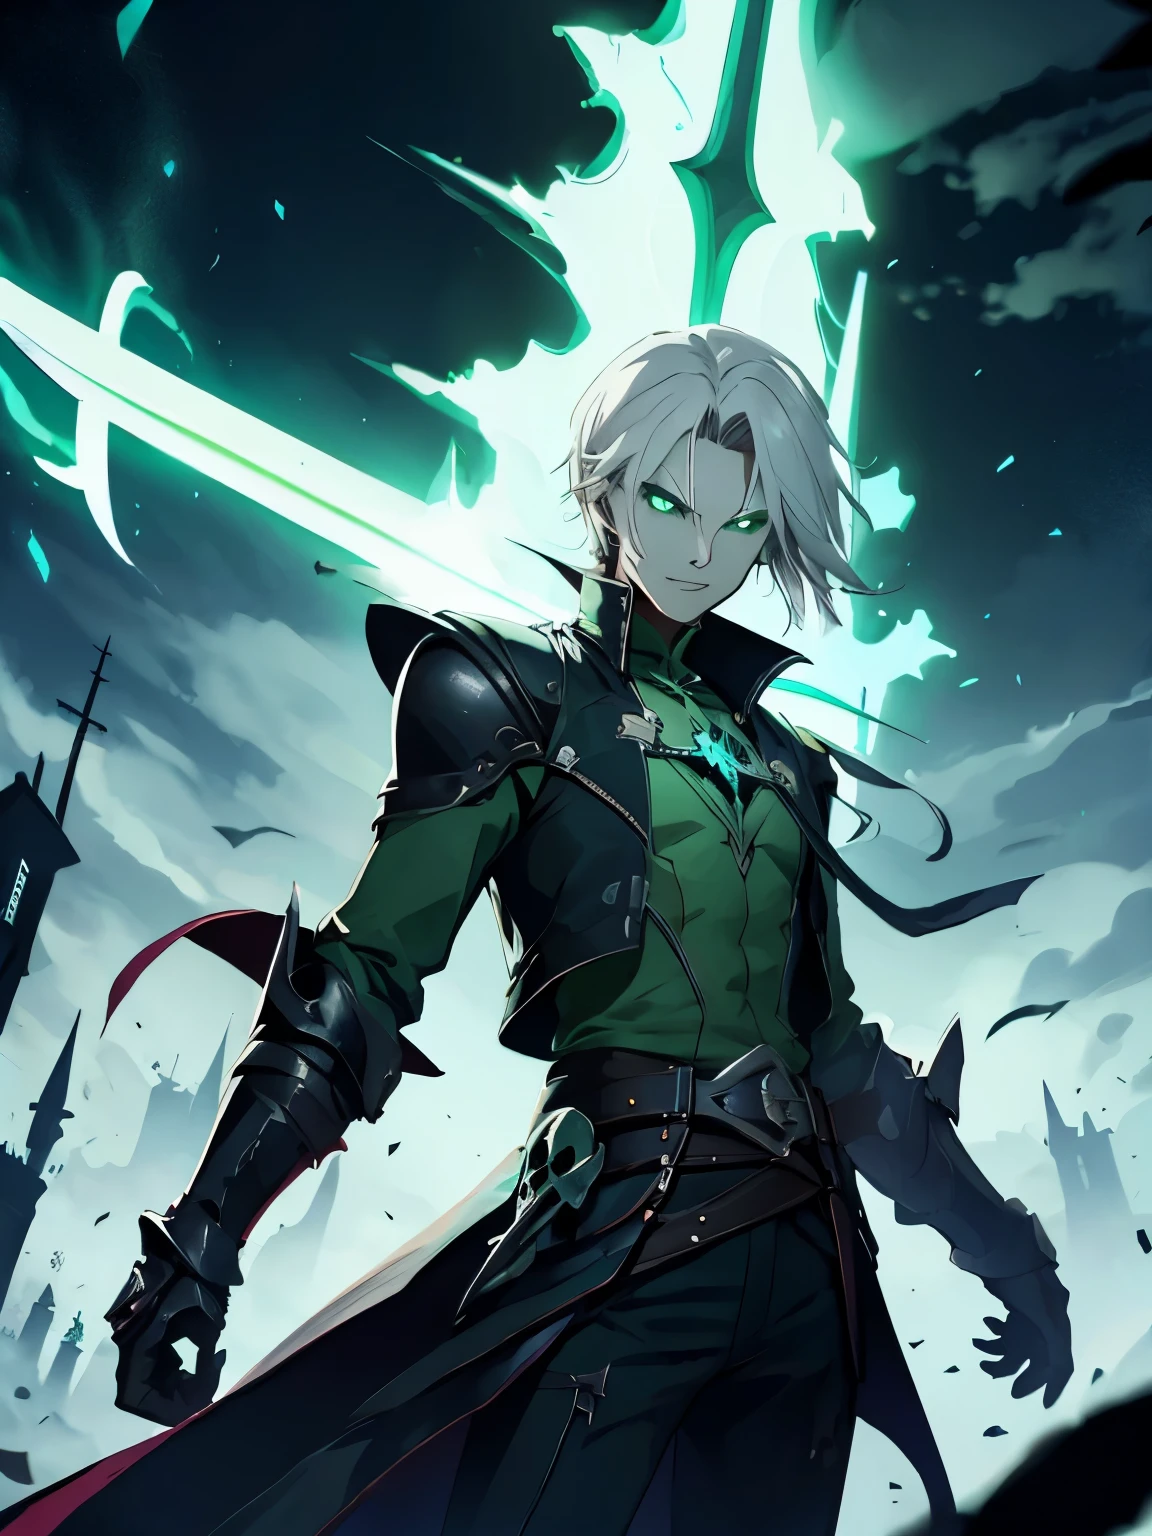 Necromancer, young man, gray hair, green eyes, total power, skinny, two swords on back, green jacket, green fog, tower, green lightning, 
sly smile, dream for life, the best quality, portrait